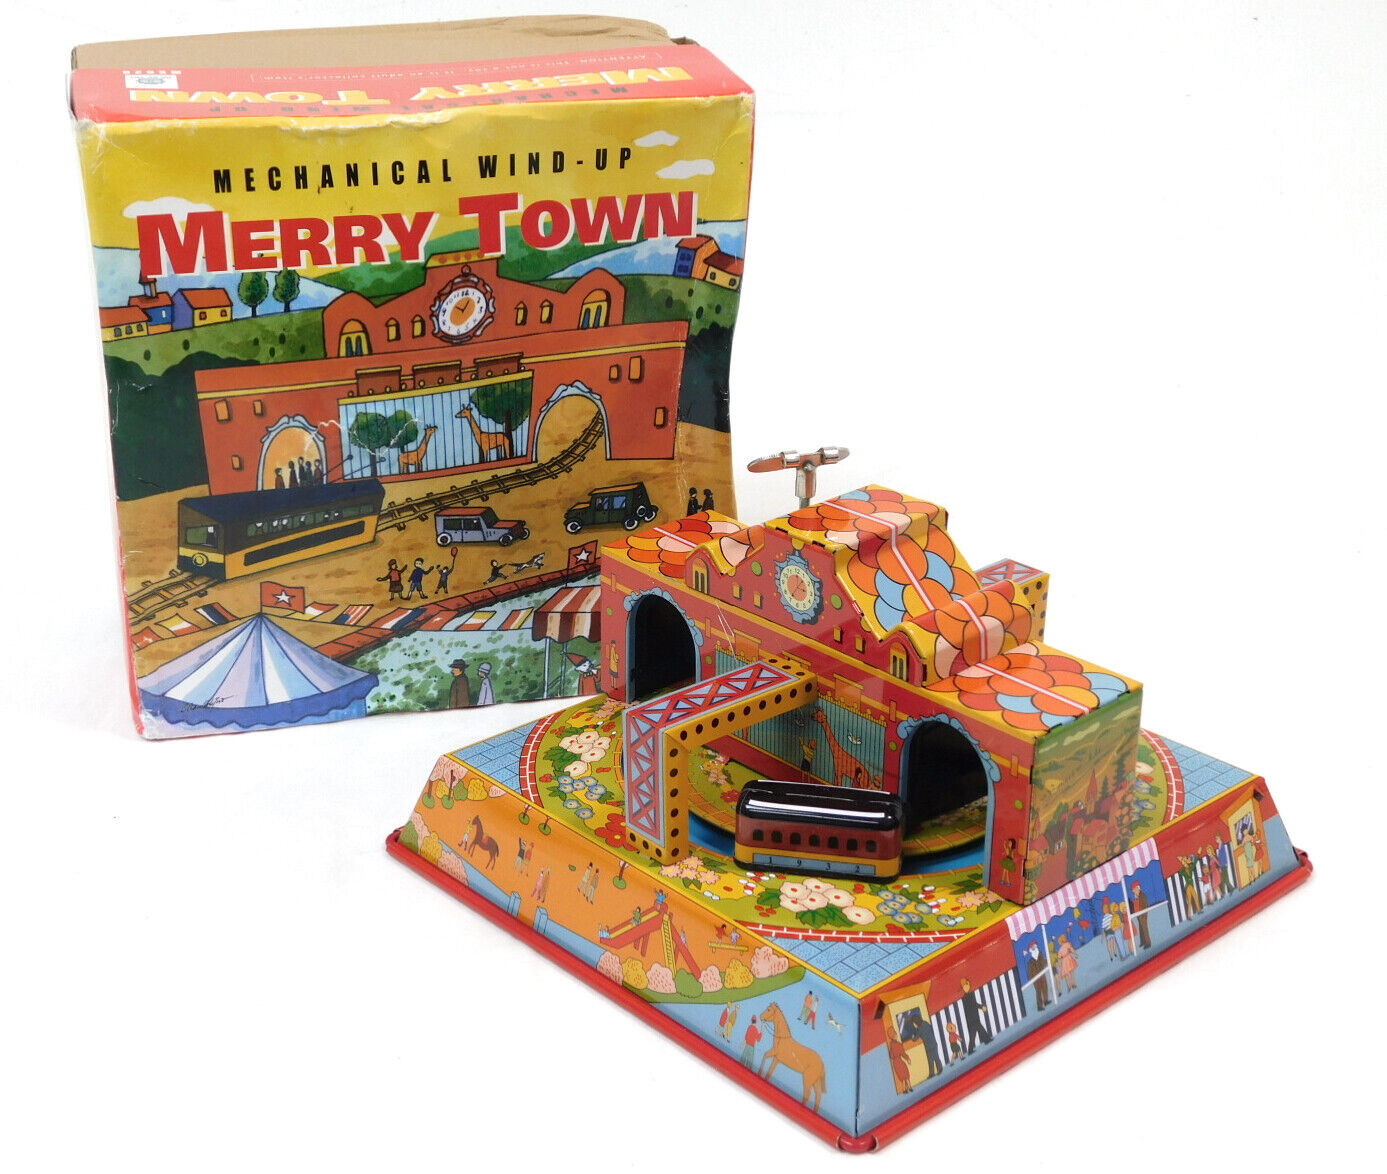 Used Ha Ha Toy Ms628 Mechanical Wind-up Merry Town W/box